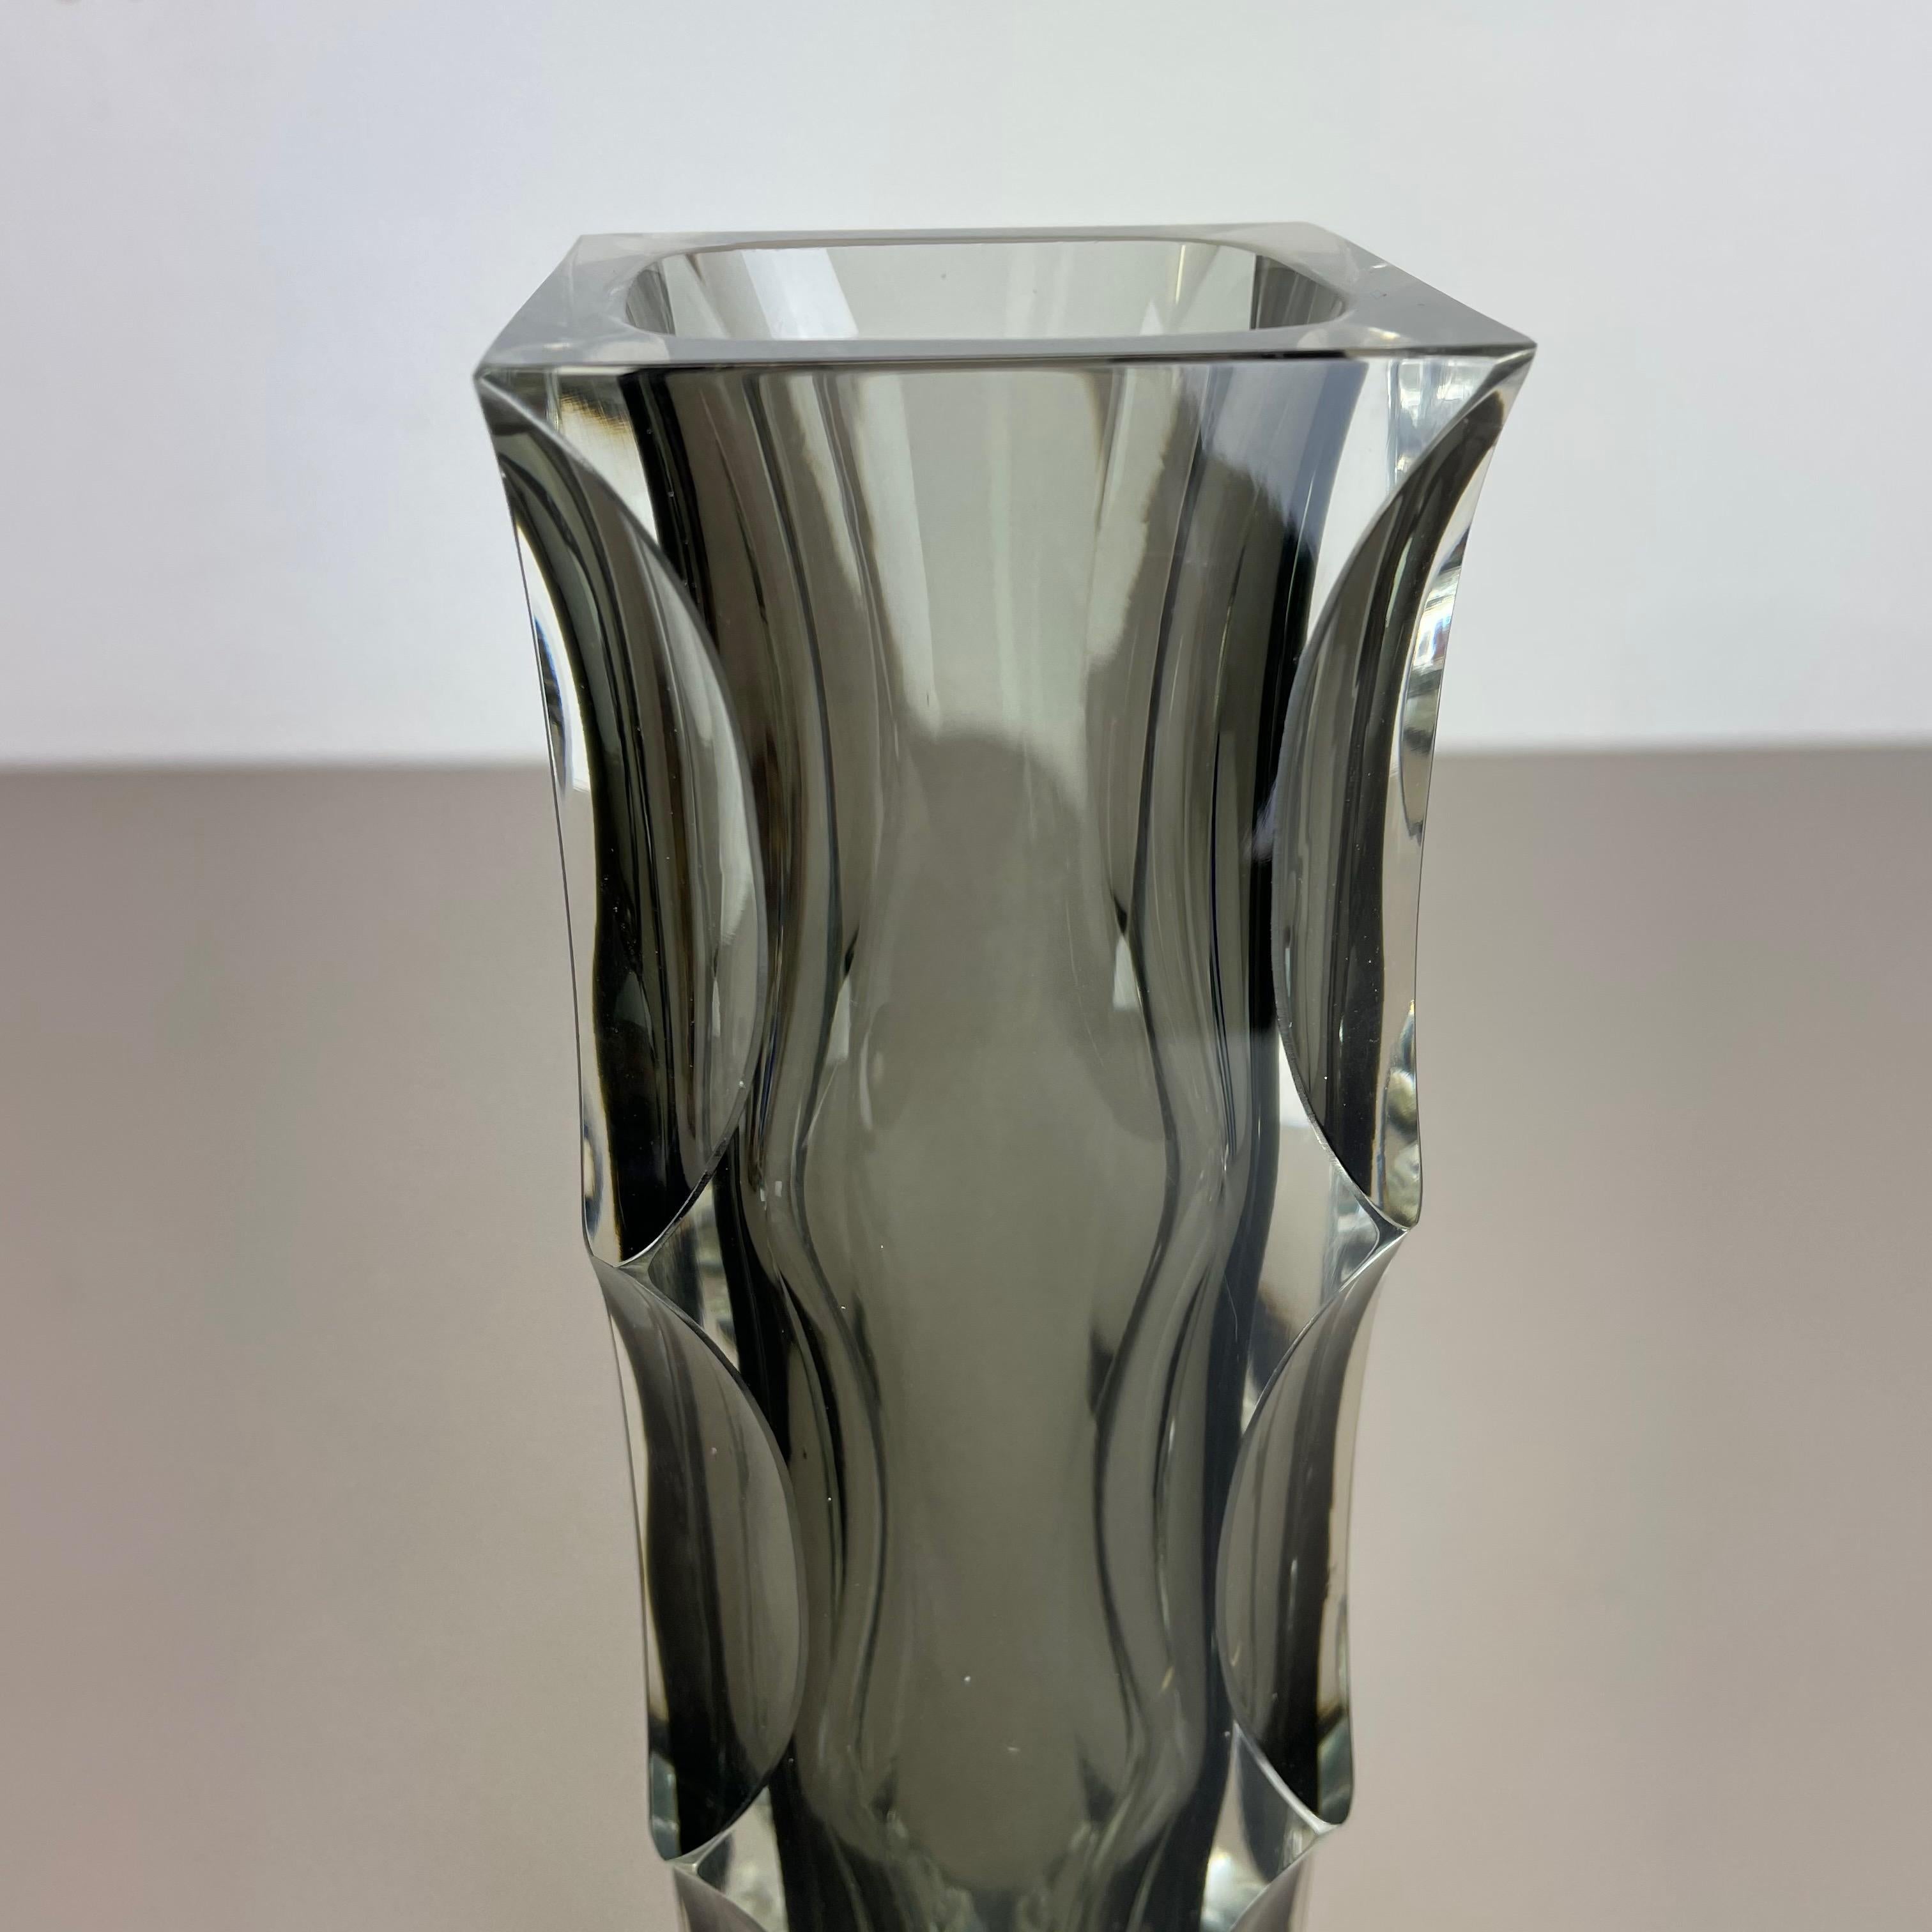 Murano Glass Extra Large Mandruzzato Faceted Glass Sommerso Vase Made in Murano, Italy For Sale